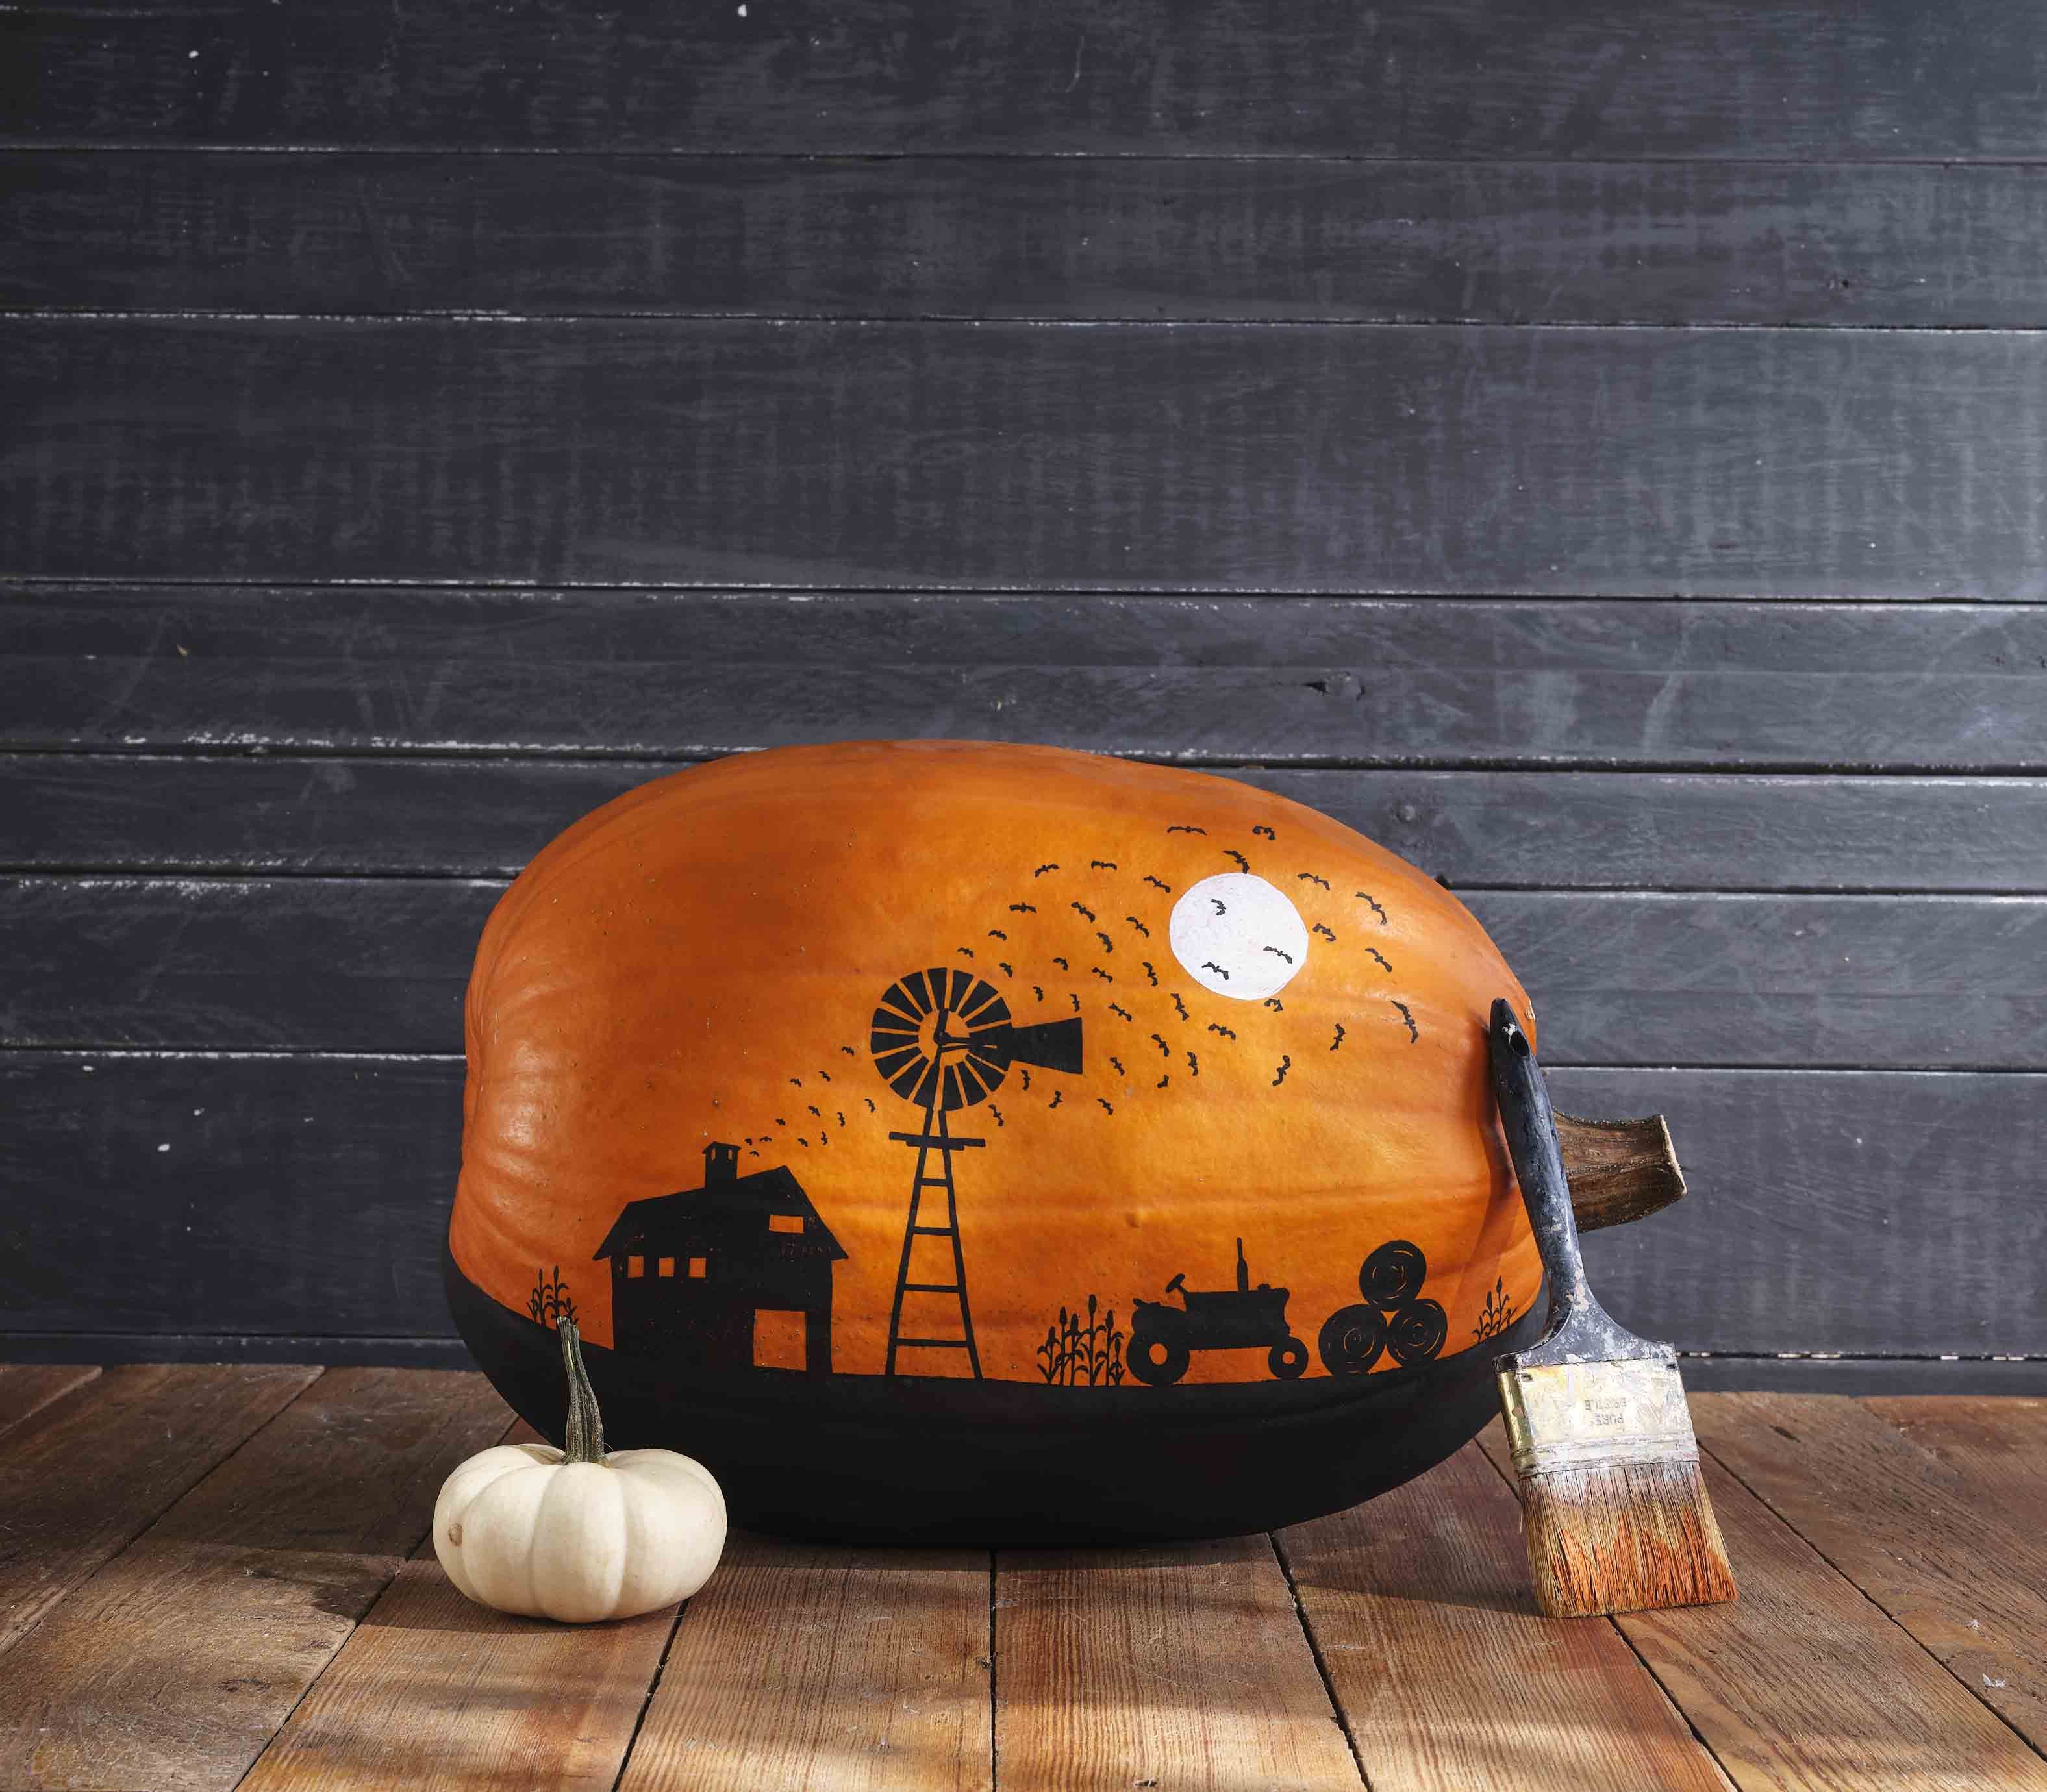 65 Easy Painted Pumpkins Ideas No Carve Halloween Pumpkin Painting Decorating Ideas See more ideas about canvas painting, night painting, art. no carve halloween pumpkin painting